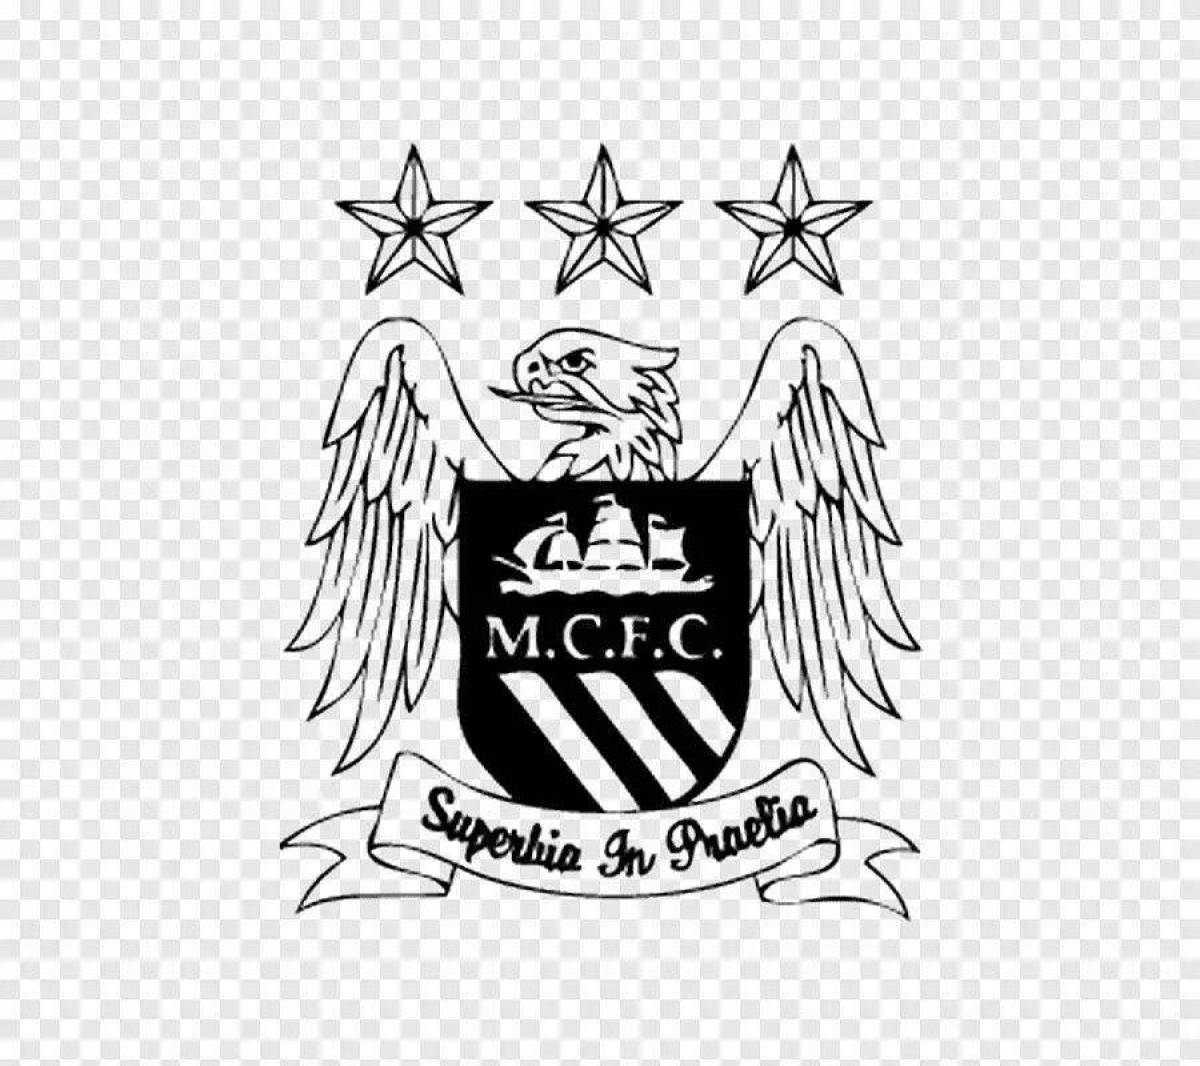 Shining Manchester United coloring page